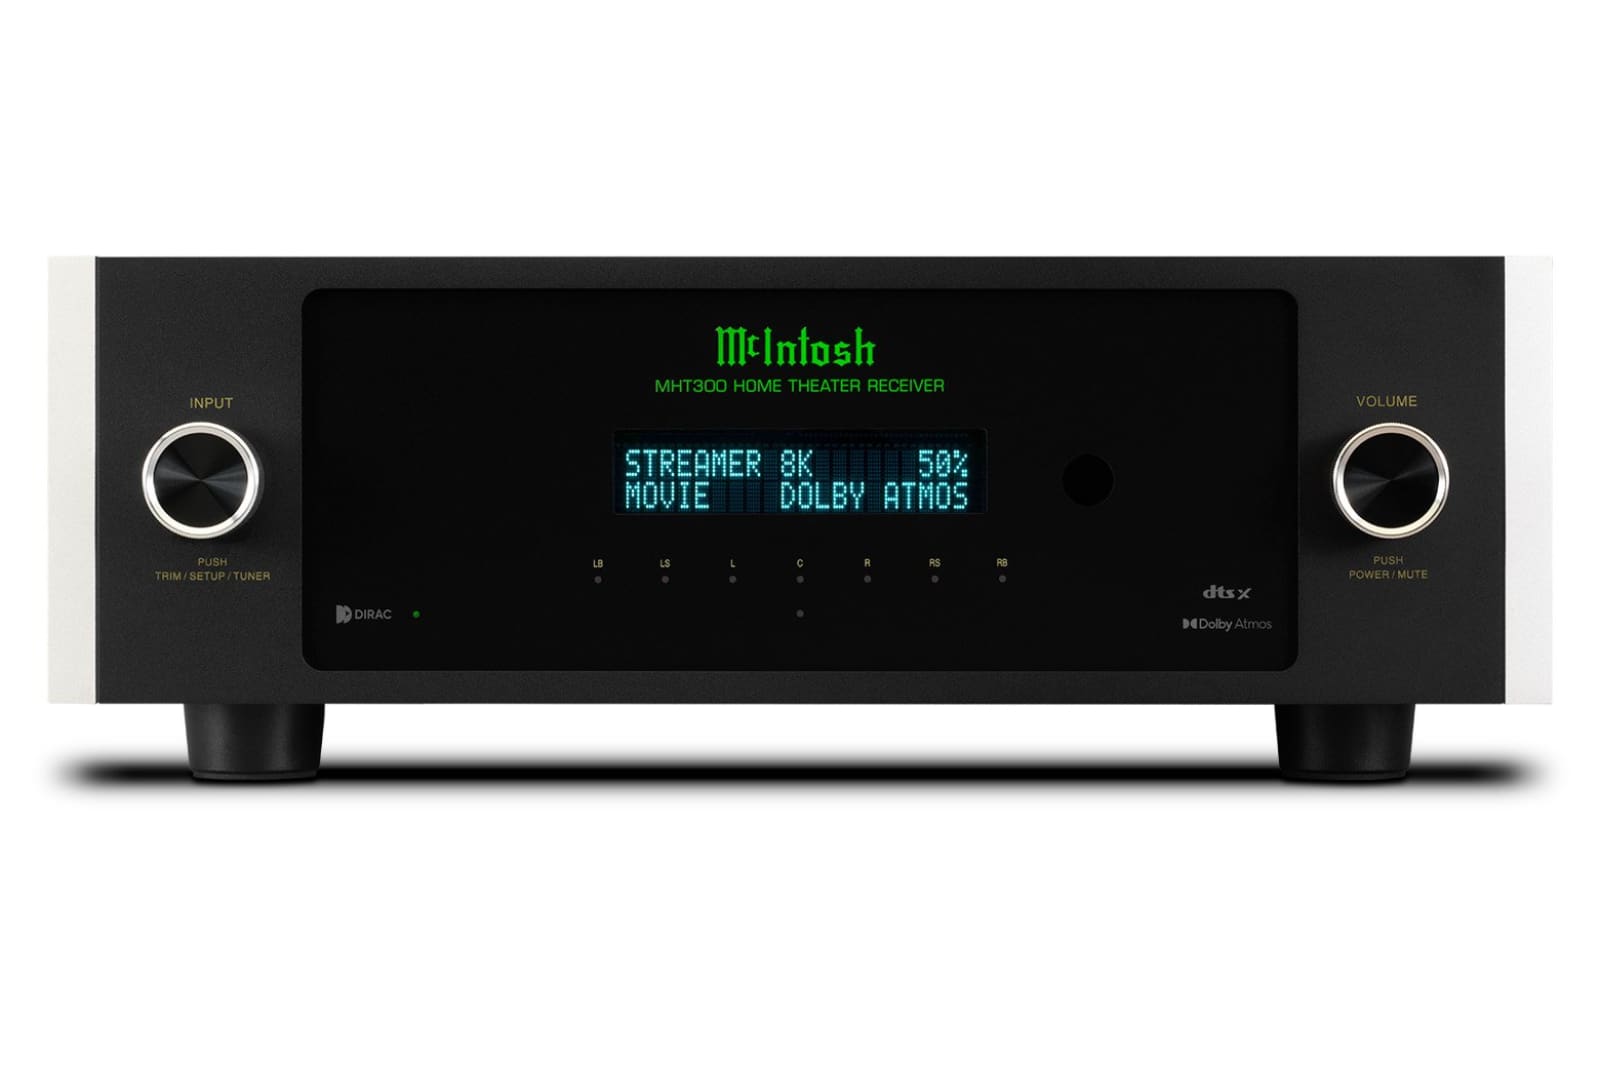 Mcintosh Mht300 Home Theater Receiver - Pre-Order Now Integrated Amplifier